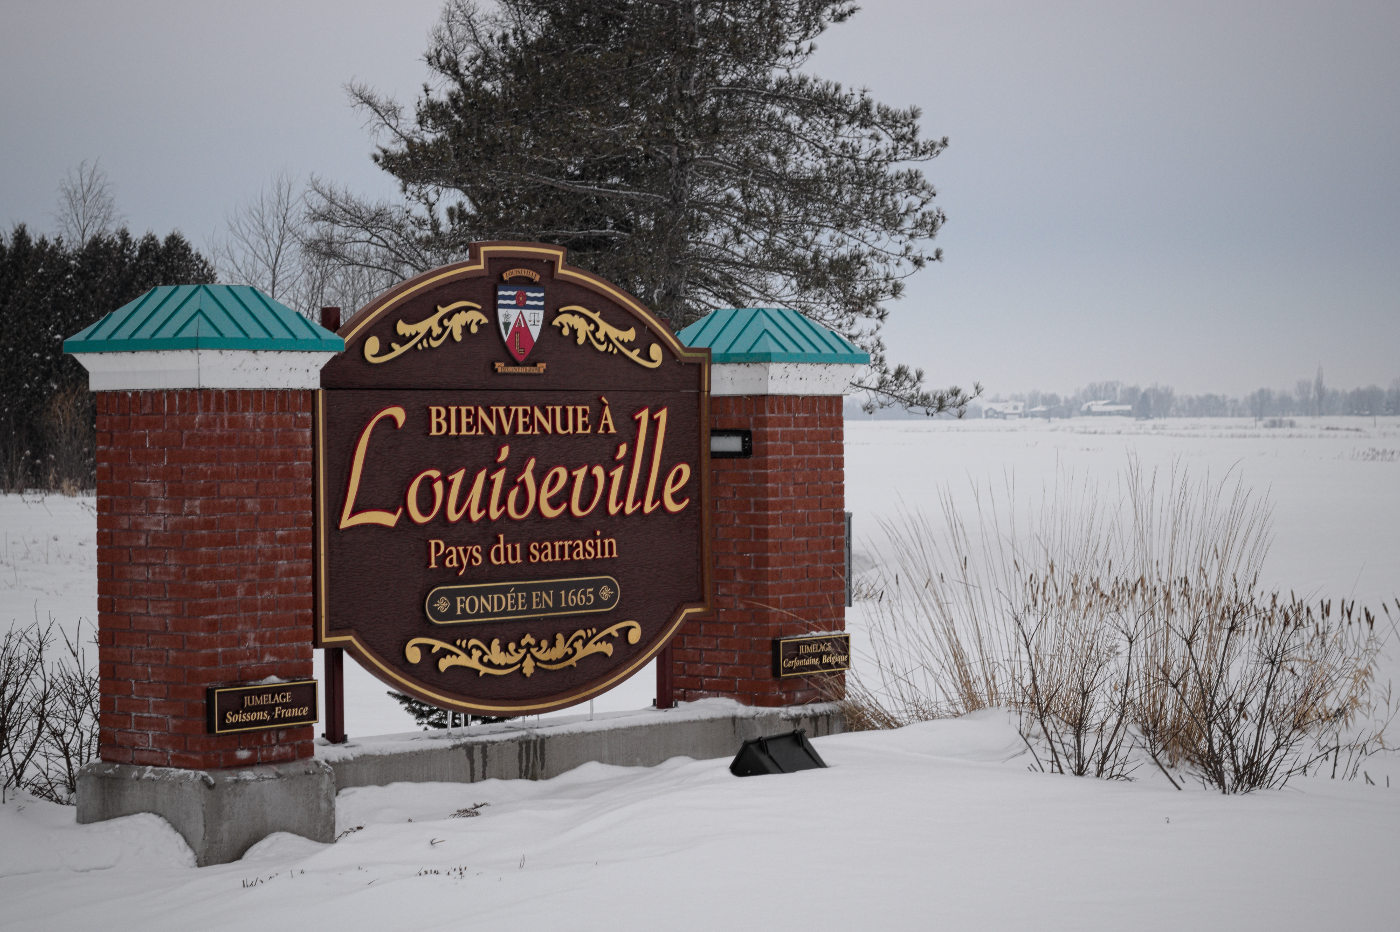 A warm welcome as we arrive in Louiseville